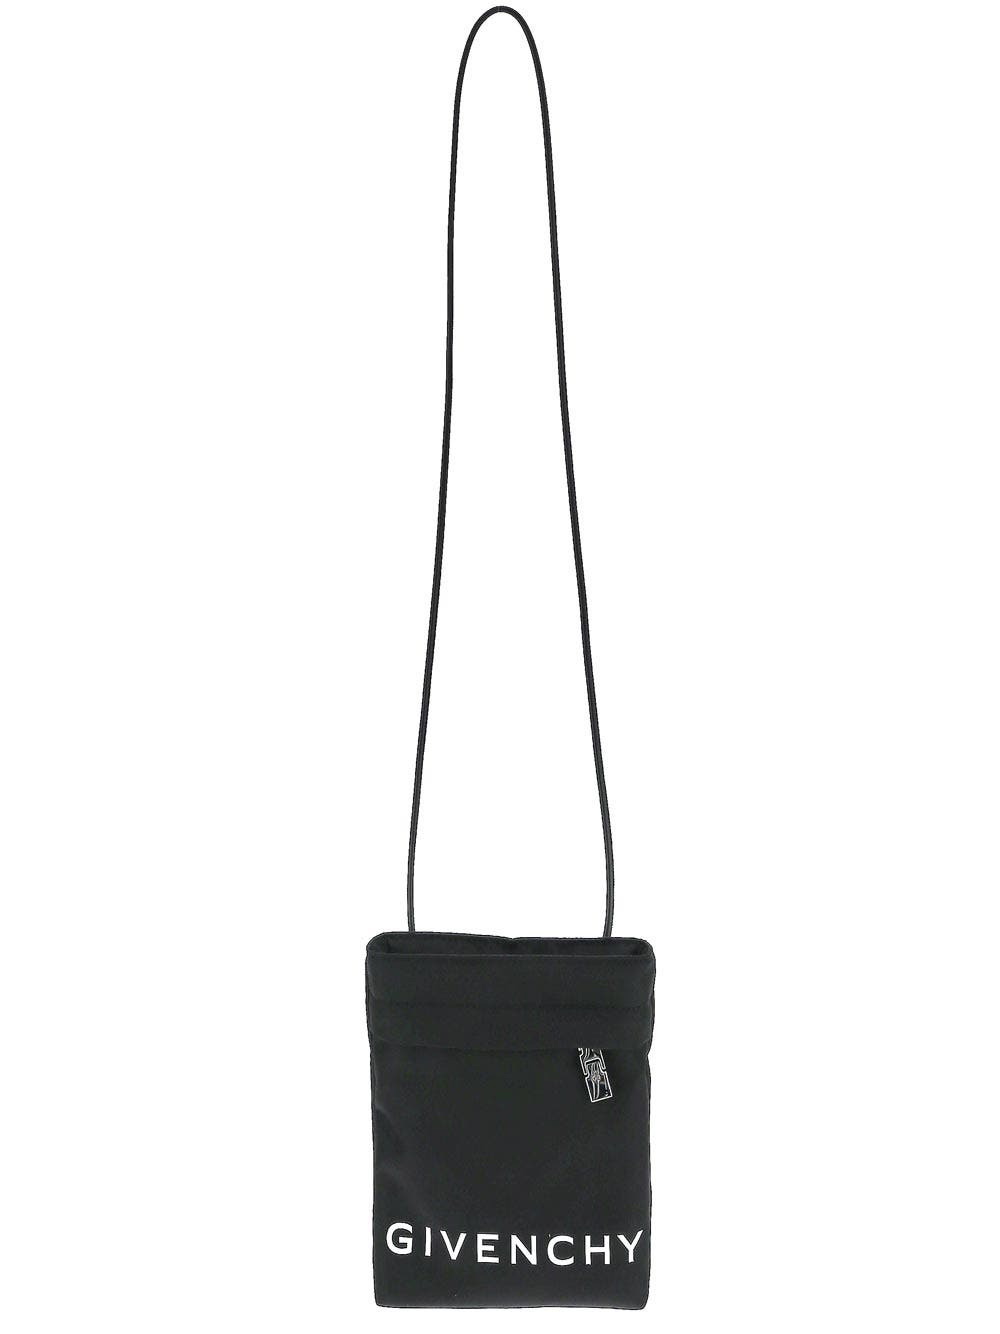 Photo: Givenchy Black Phone Pouch